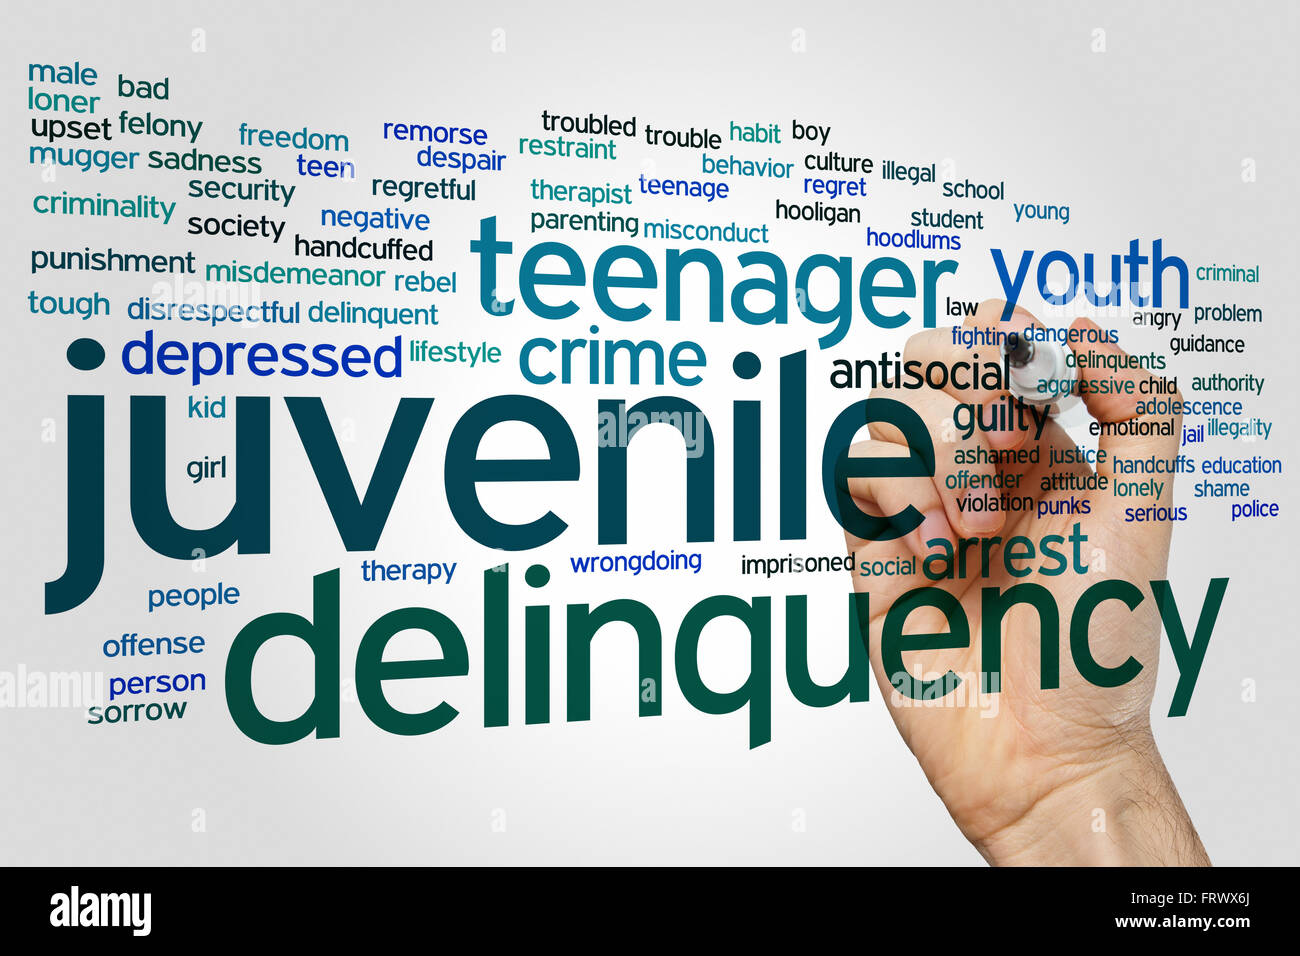 Juvenile delinquency concept word cloud background Stock Photo